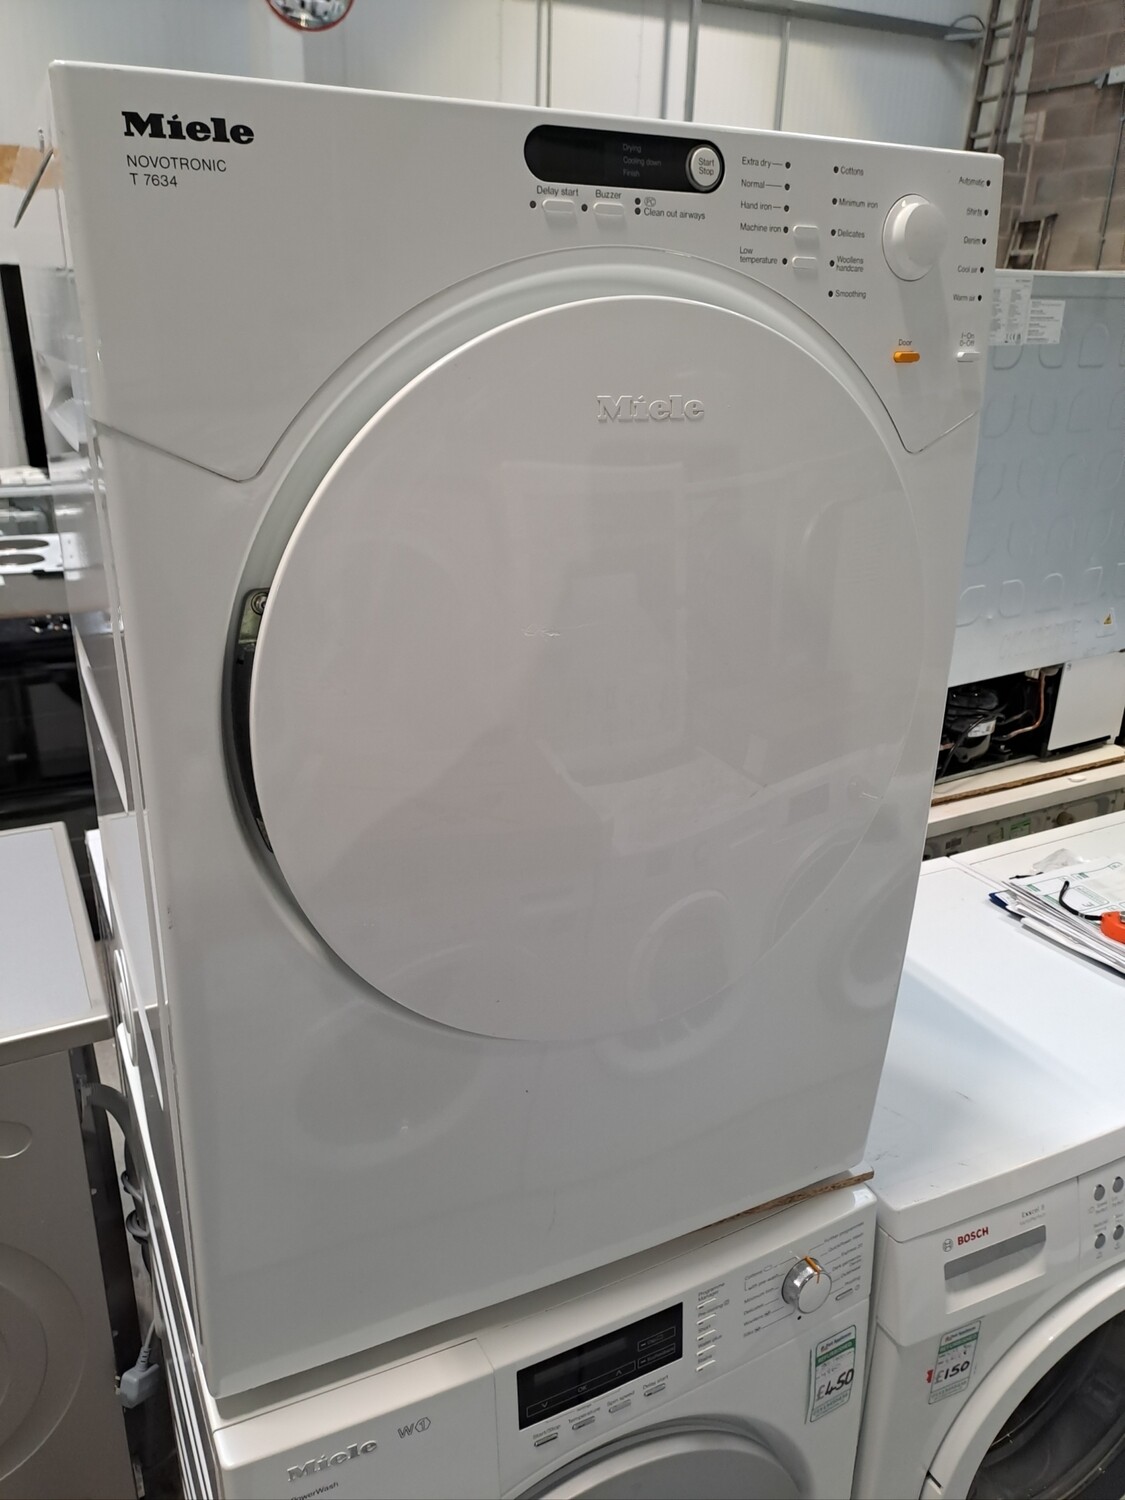 Miele T7634 Vented Dryer 6kg White Refurbished 6 Months Guarantee